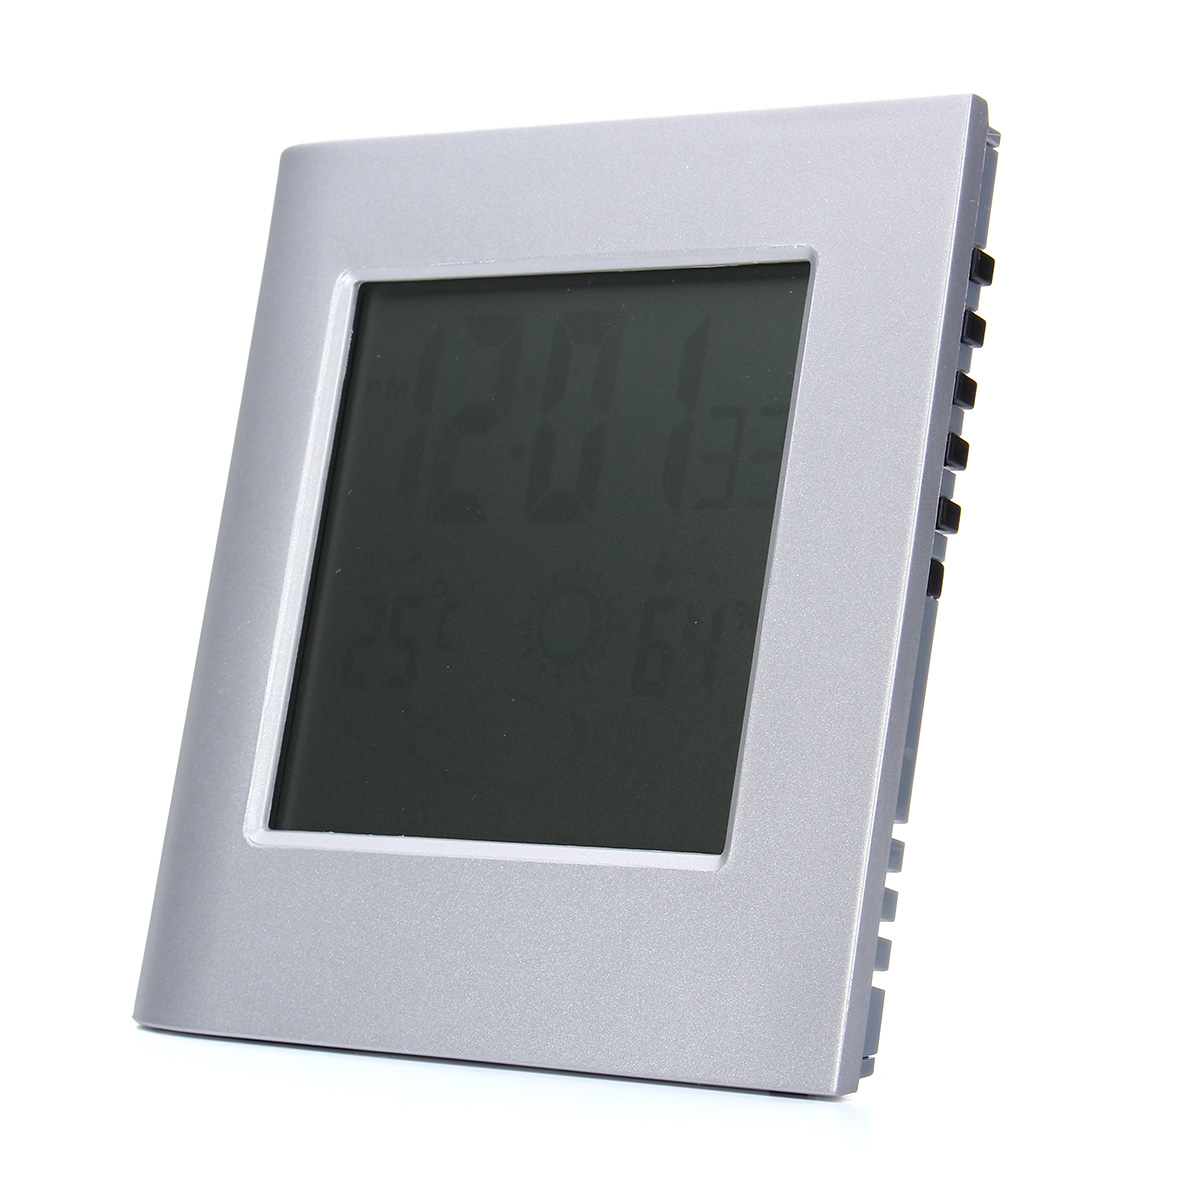 Solar-Battery-Wireless-Weather-Station-Clock-Temperature-Sensor-Meter-Humidity-Thermometer-1218739-4